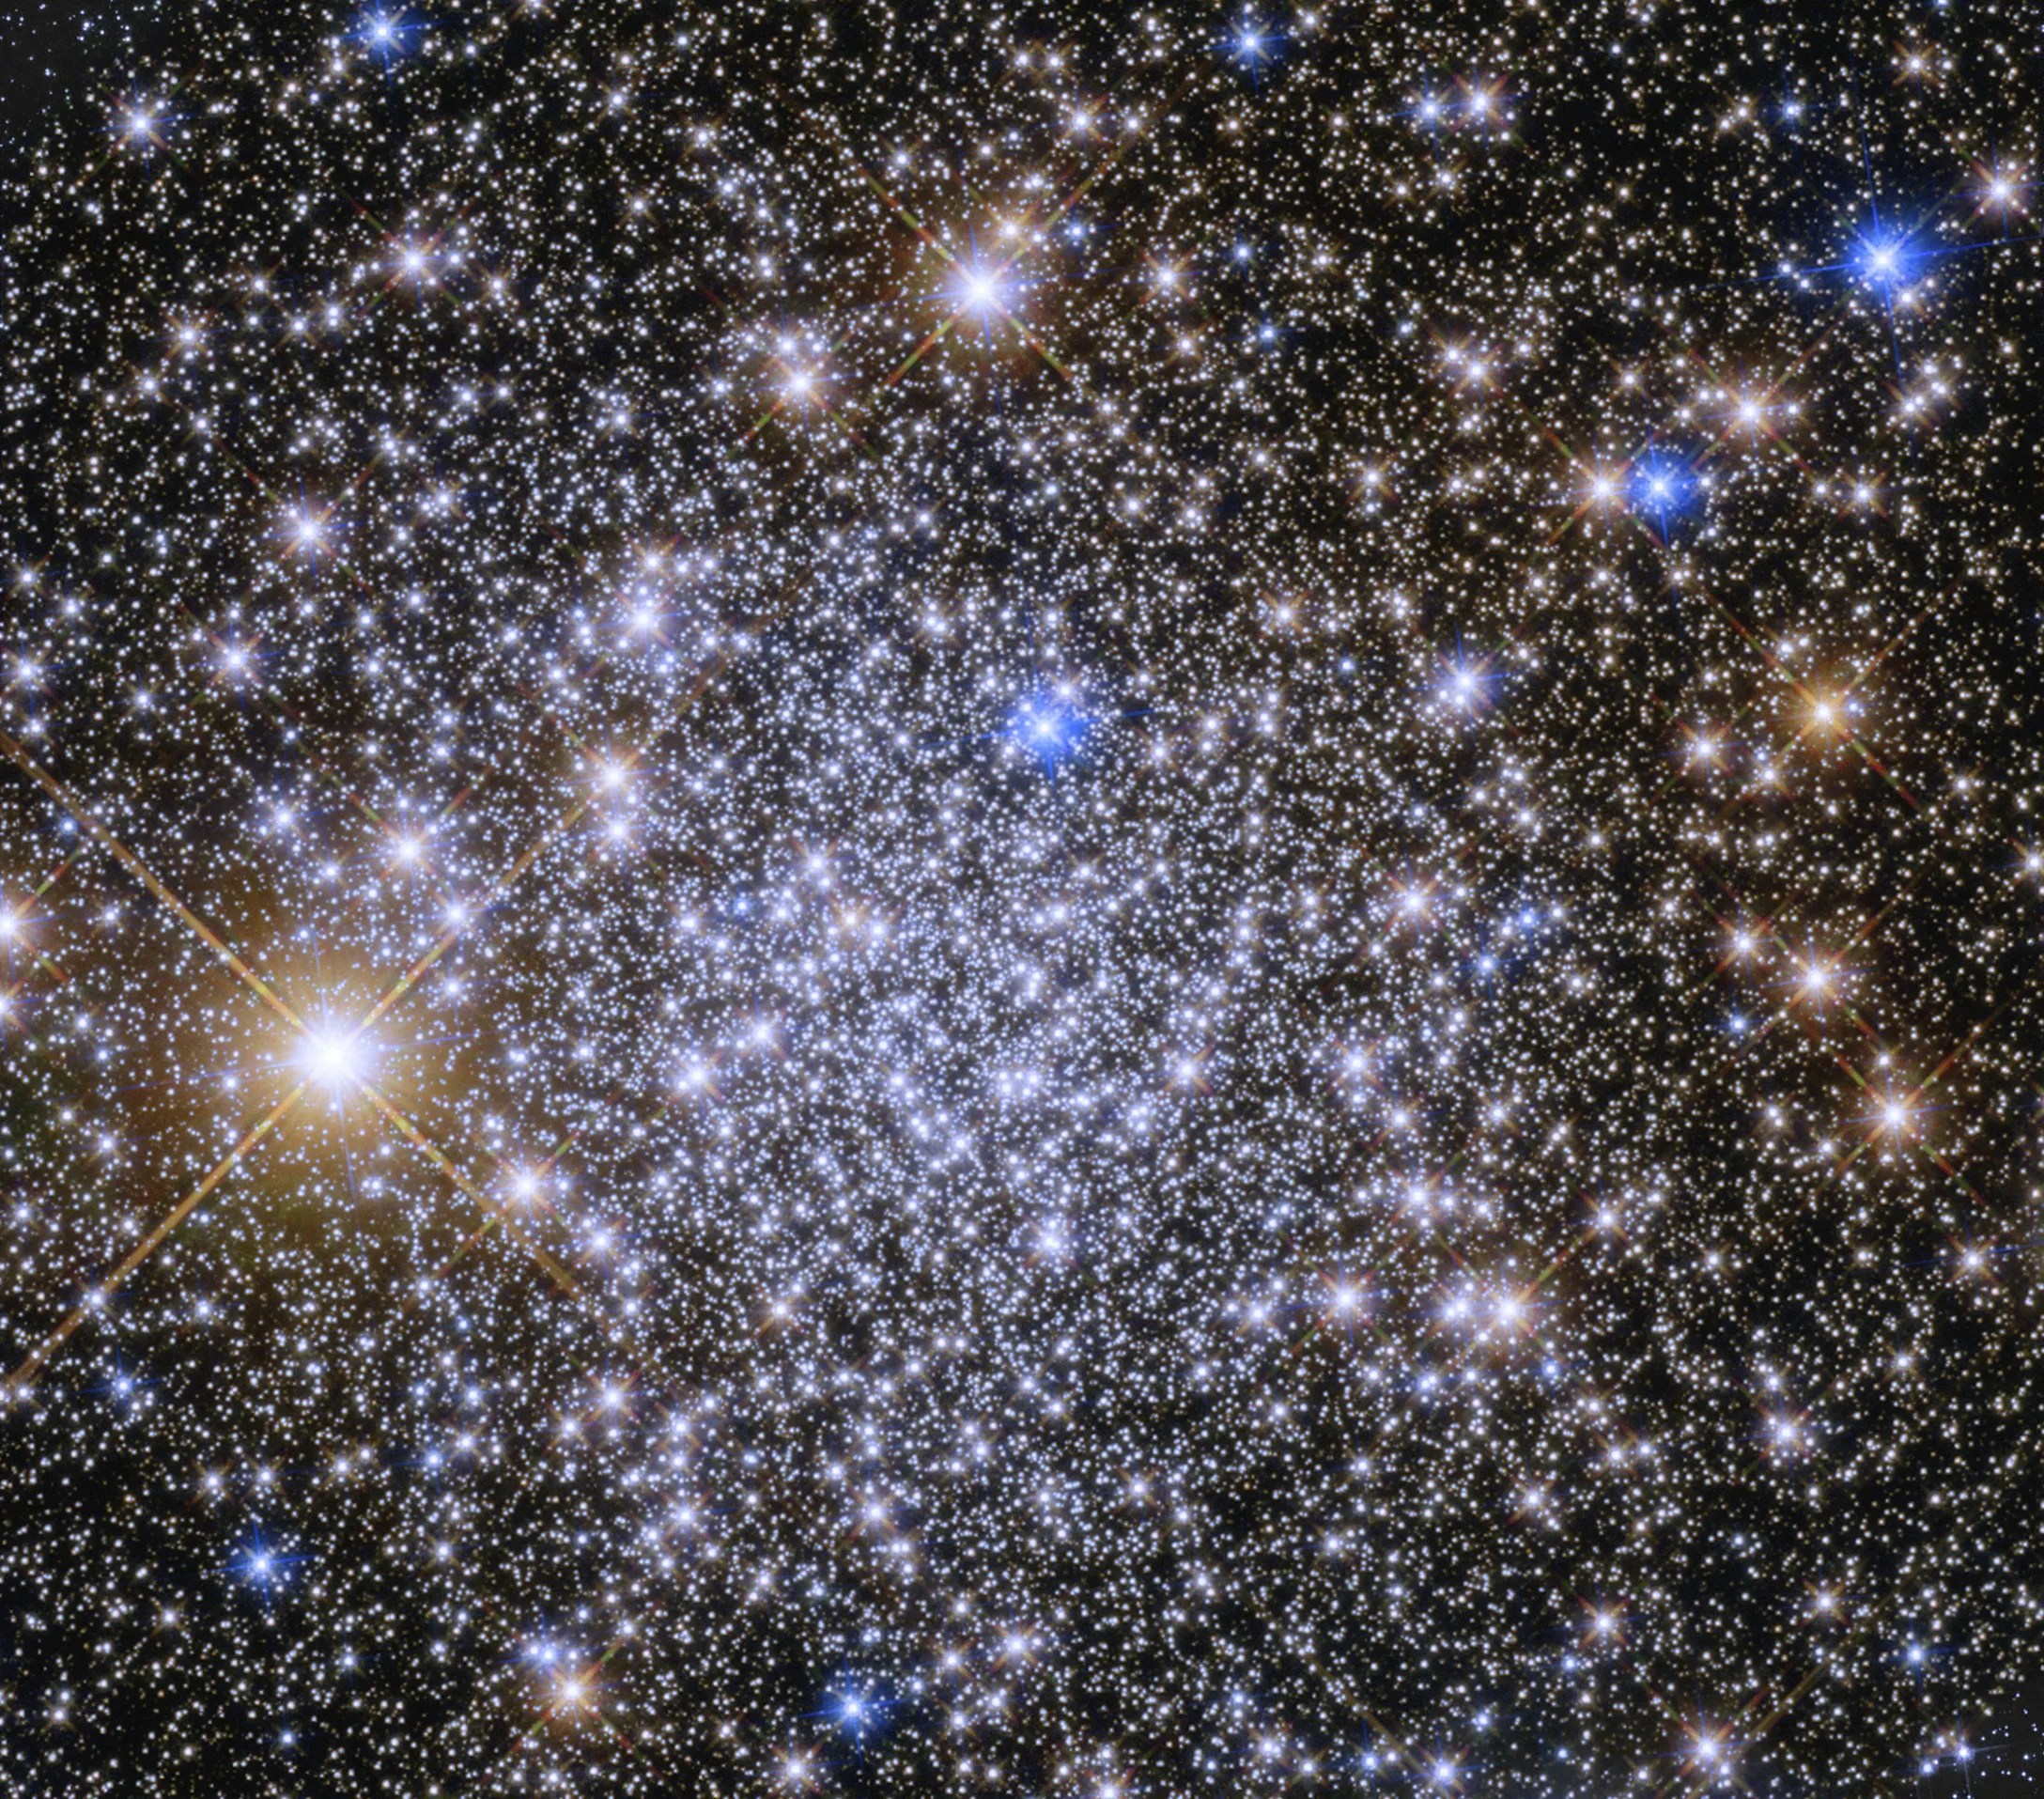 Bright blue-white stars fill the scene with a smattering or bright yellow-white stars